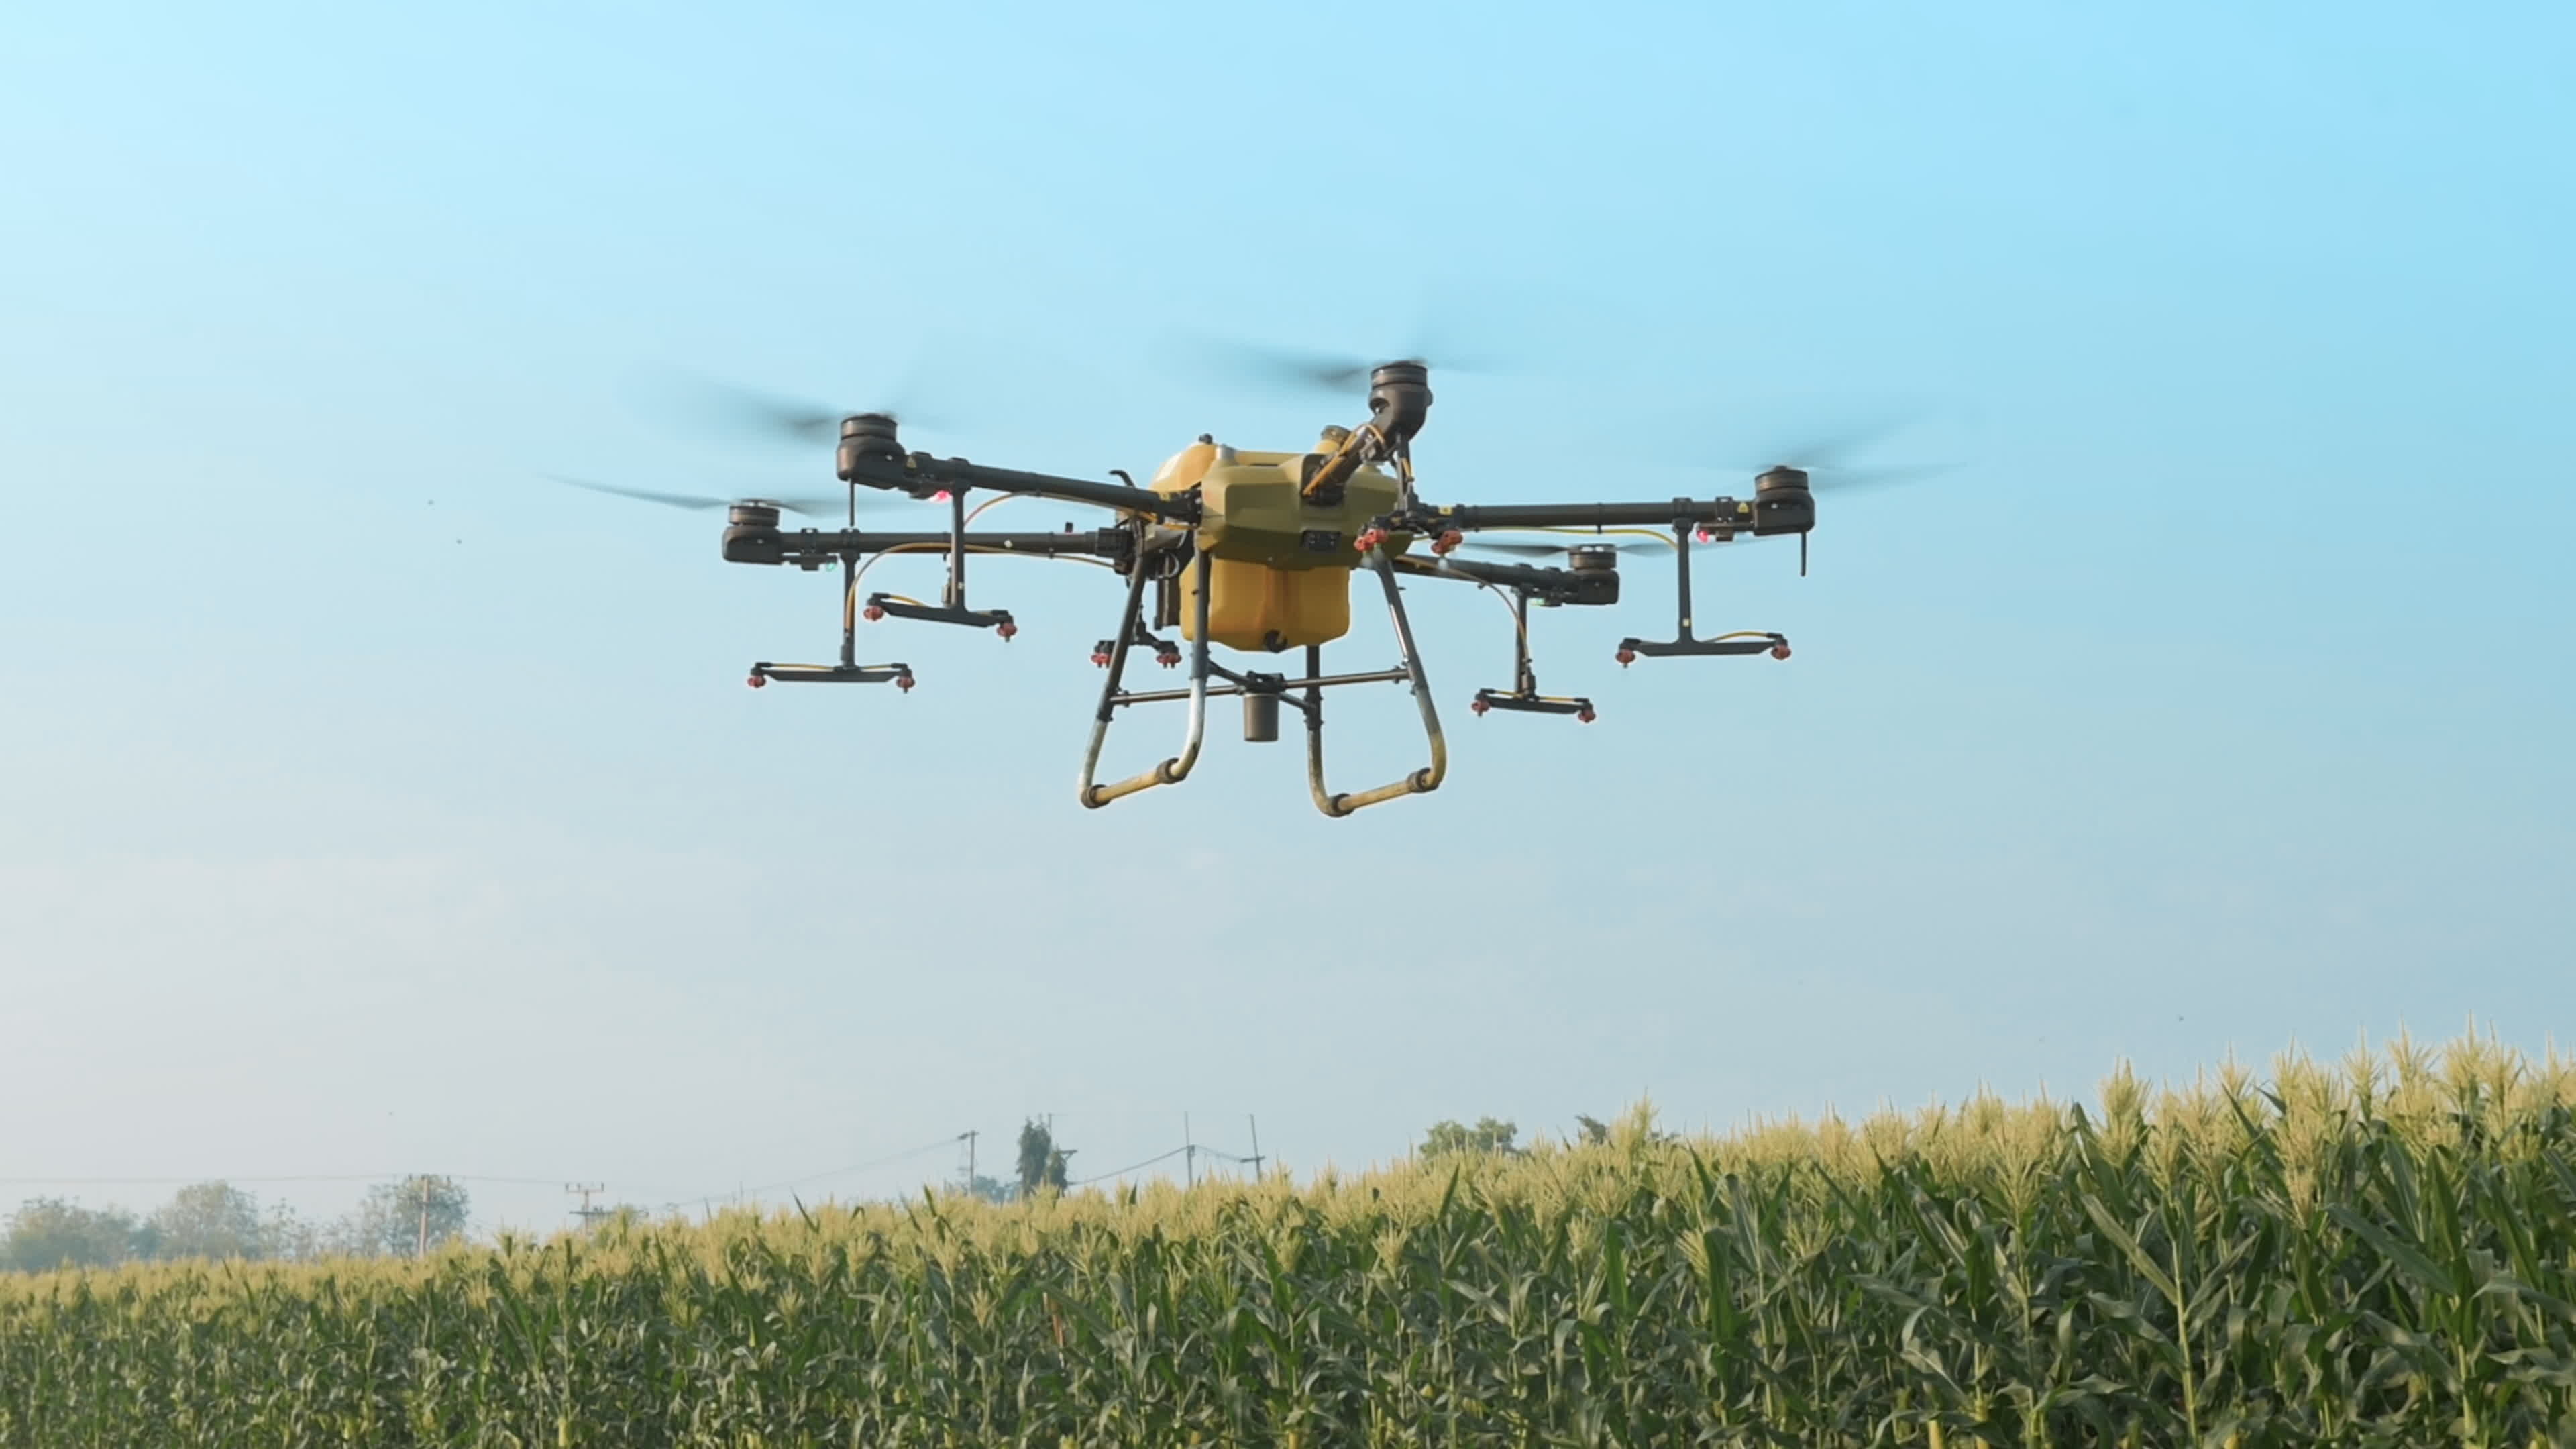 Drone: Agriculture drone, Fertilizer and pesticide spraying, High technology innovations, Smart farming. 3840x2160 4K Background.